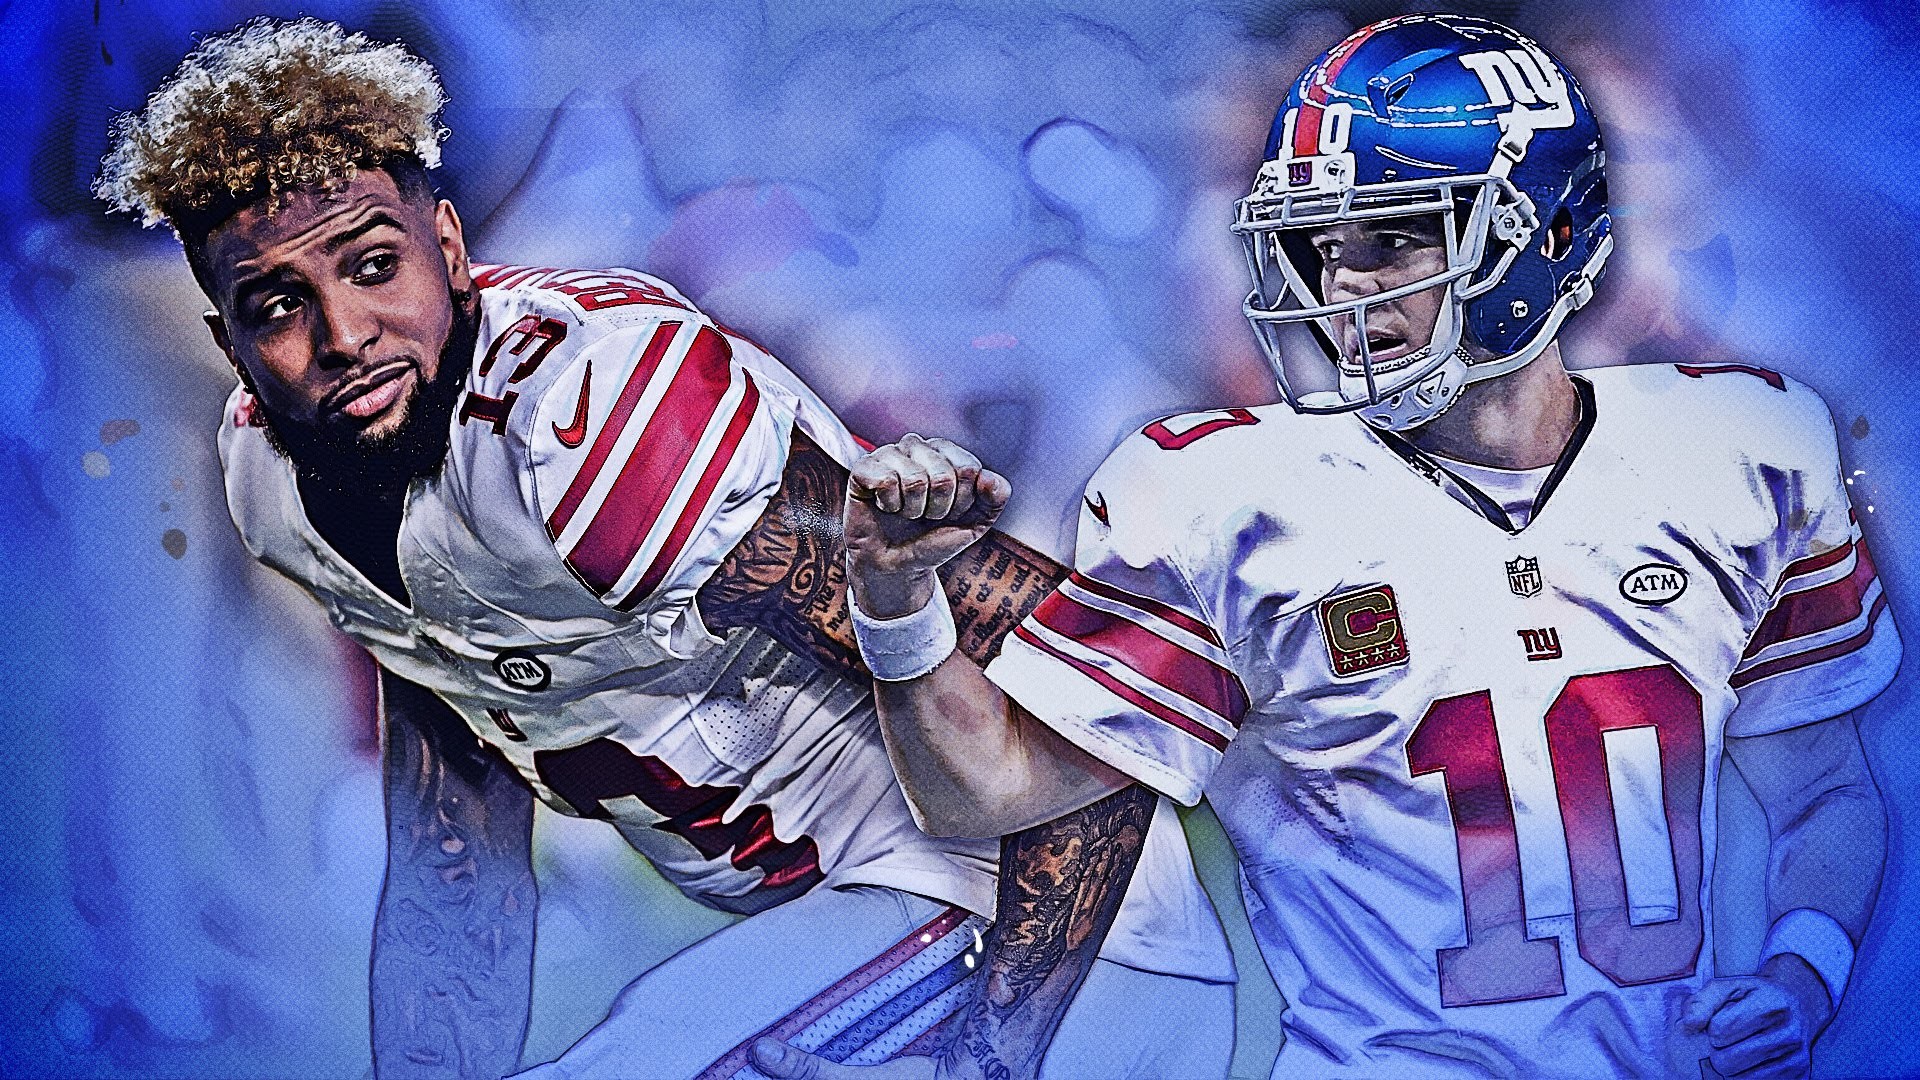 1920x1080 eli manning backgrounds free download | page 3 of 3 | wallpaper.wiki